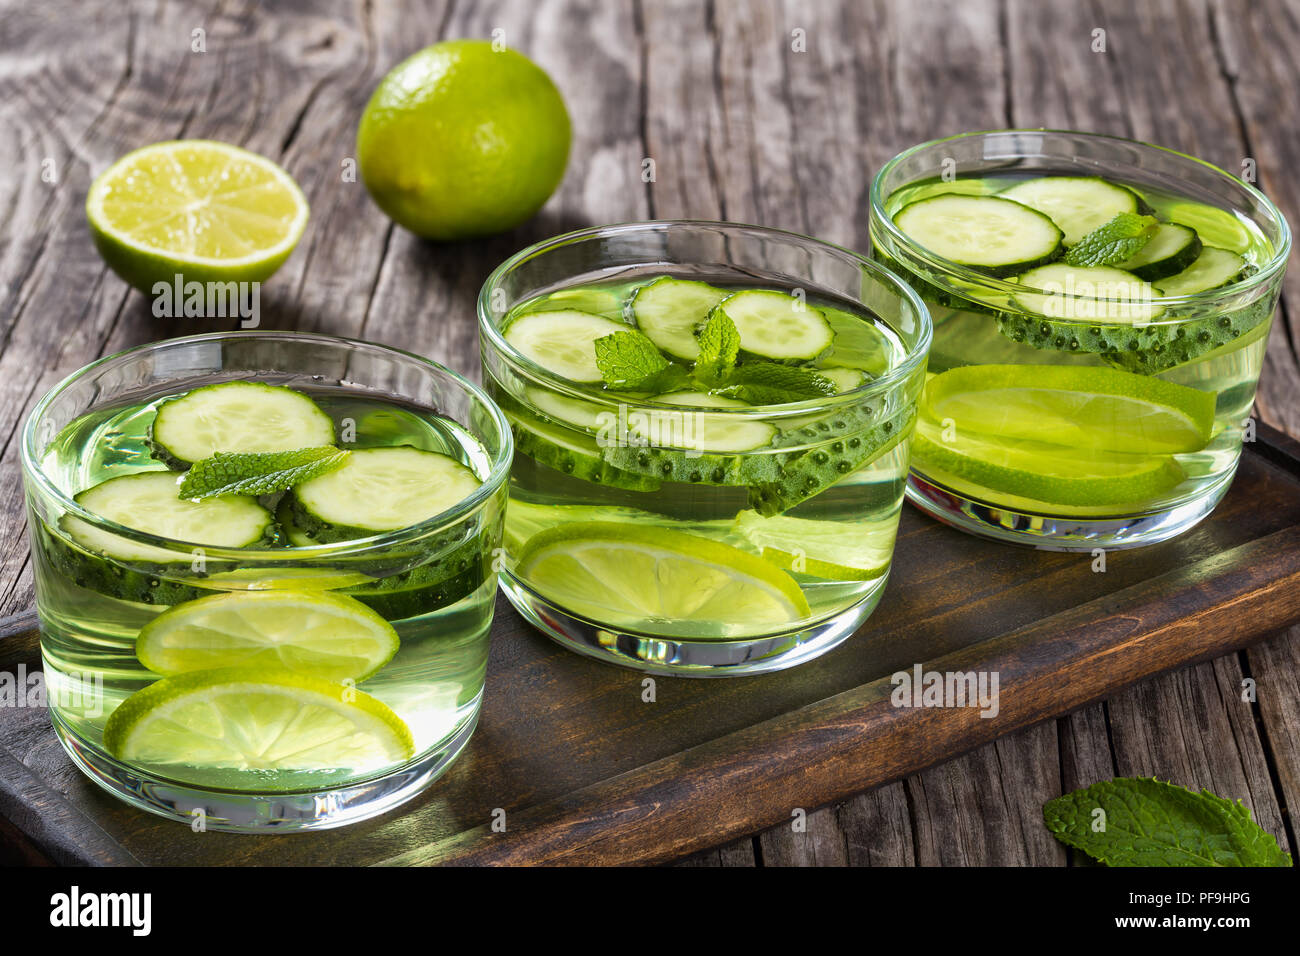 The Most Efficient Drink For Losing Belly Fat - Sassy Water: sliced cucumber, lime and mint in the three glasses on a wooden tray on an old wooden tab Stock Photo